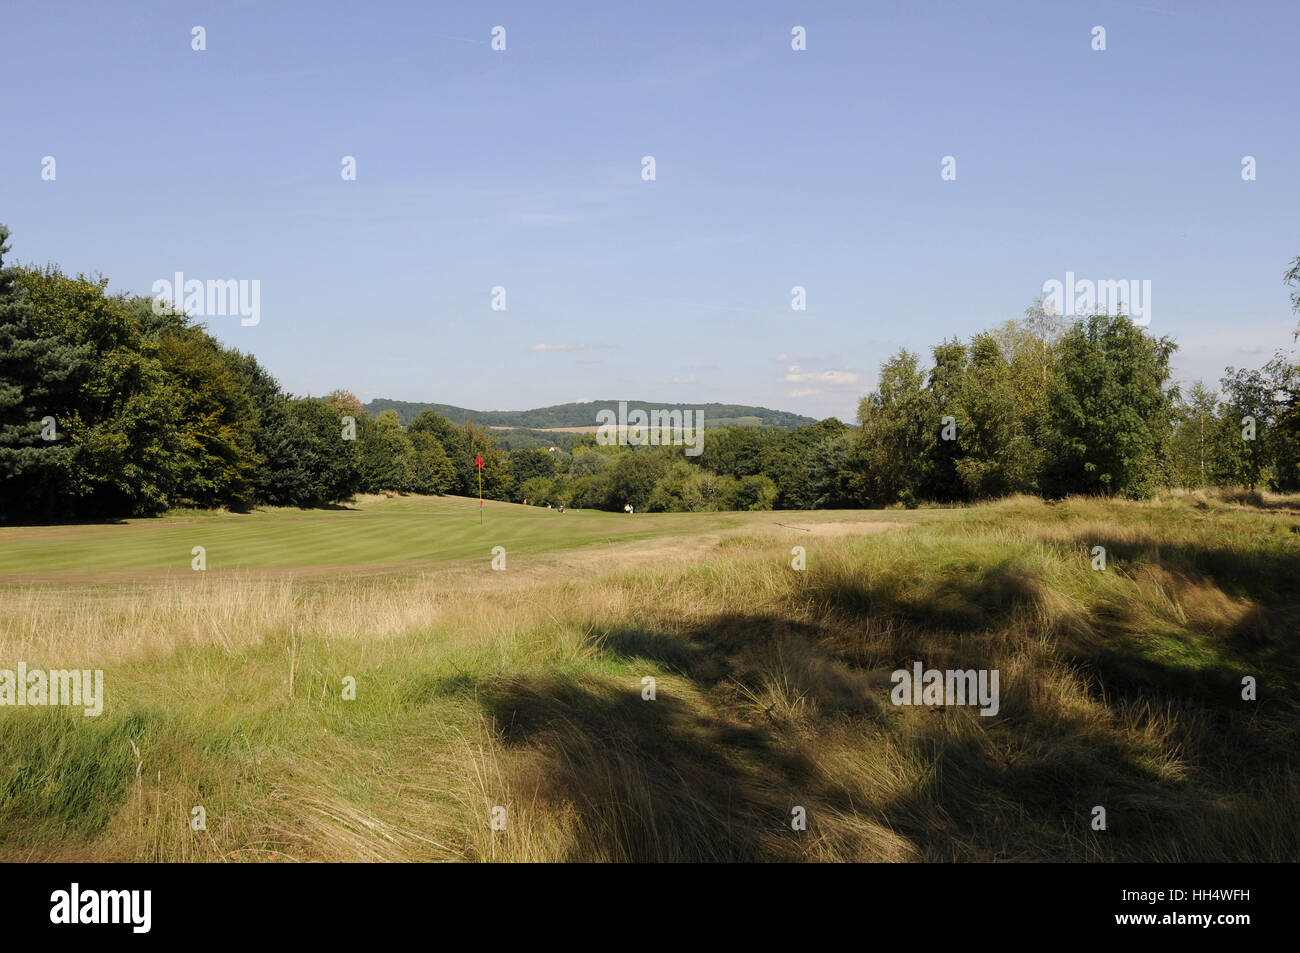 View of the 15th Green over Fescue Grass with Surrey Hills in background, Bletchingley Golf Club Surrey England Stock Photo